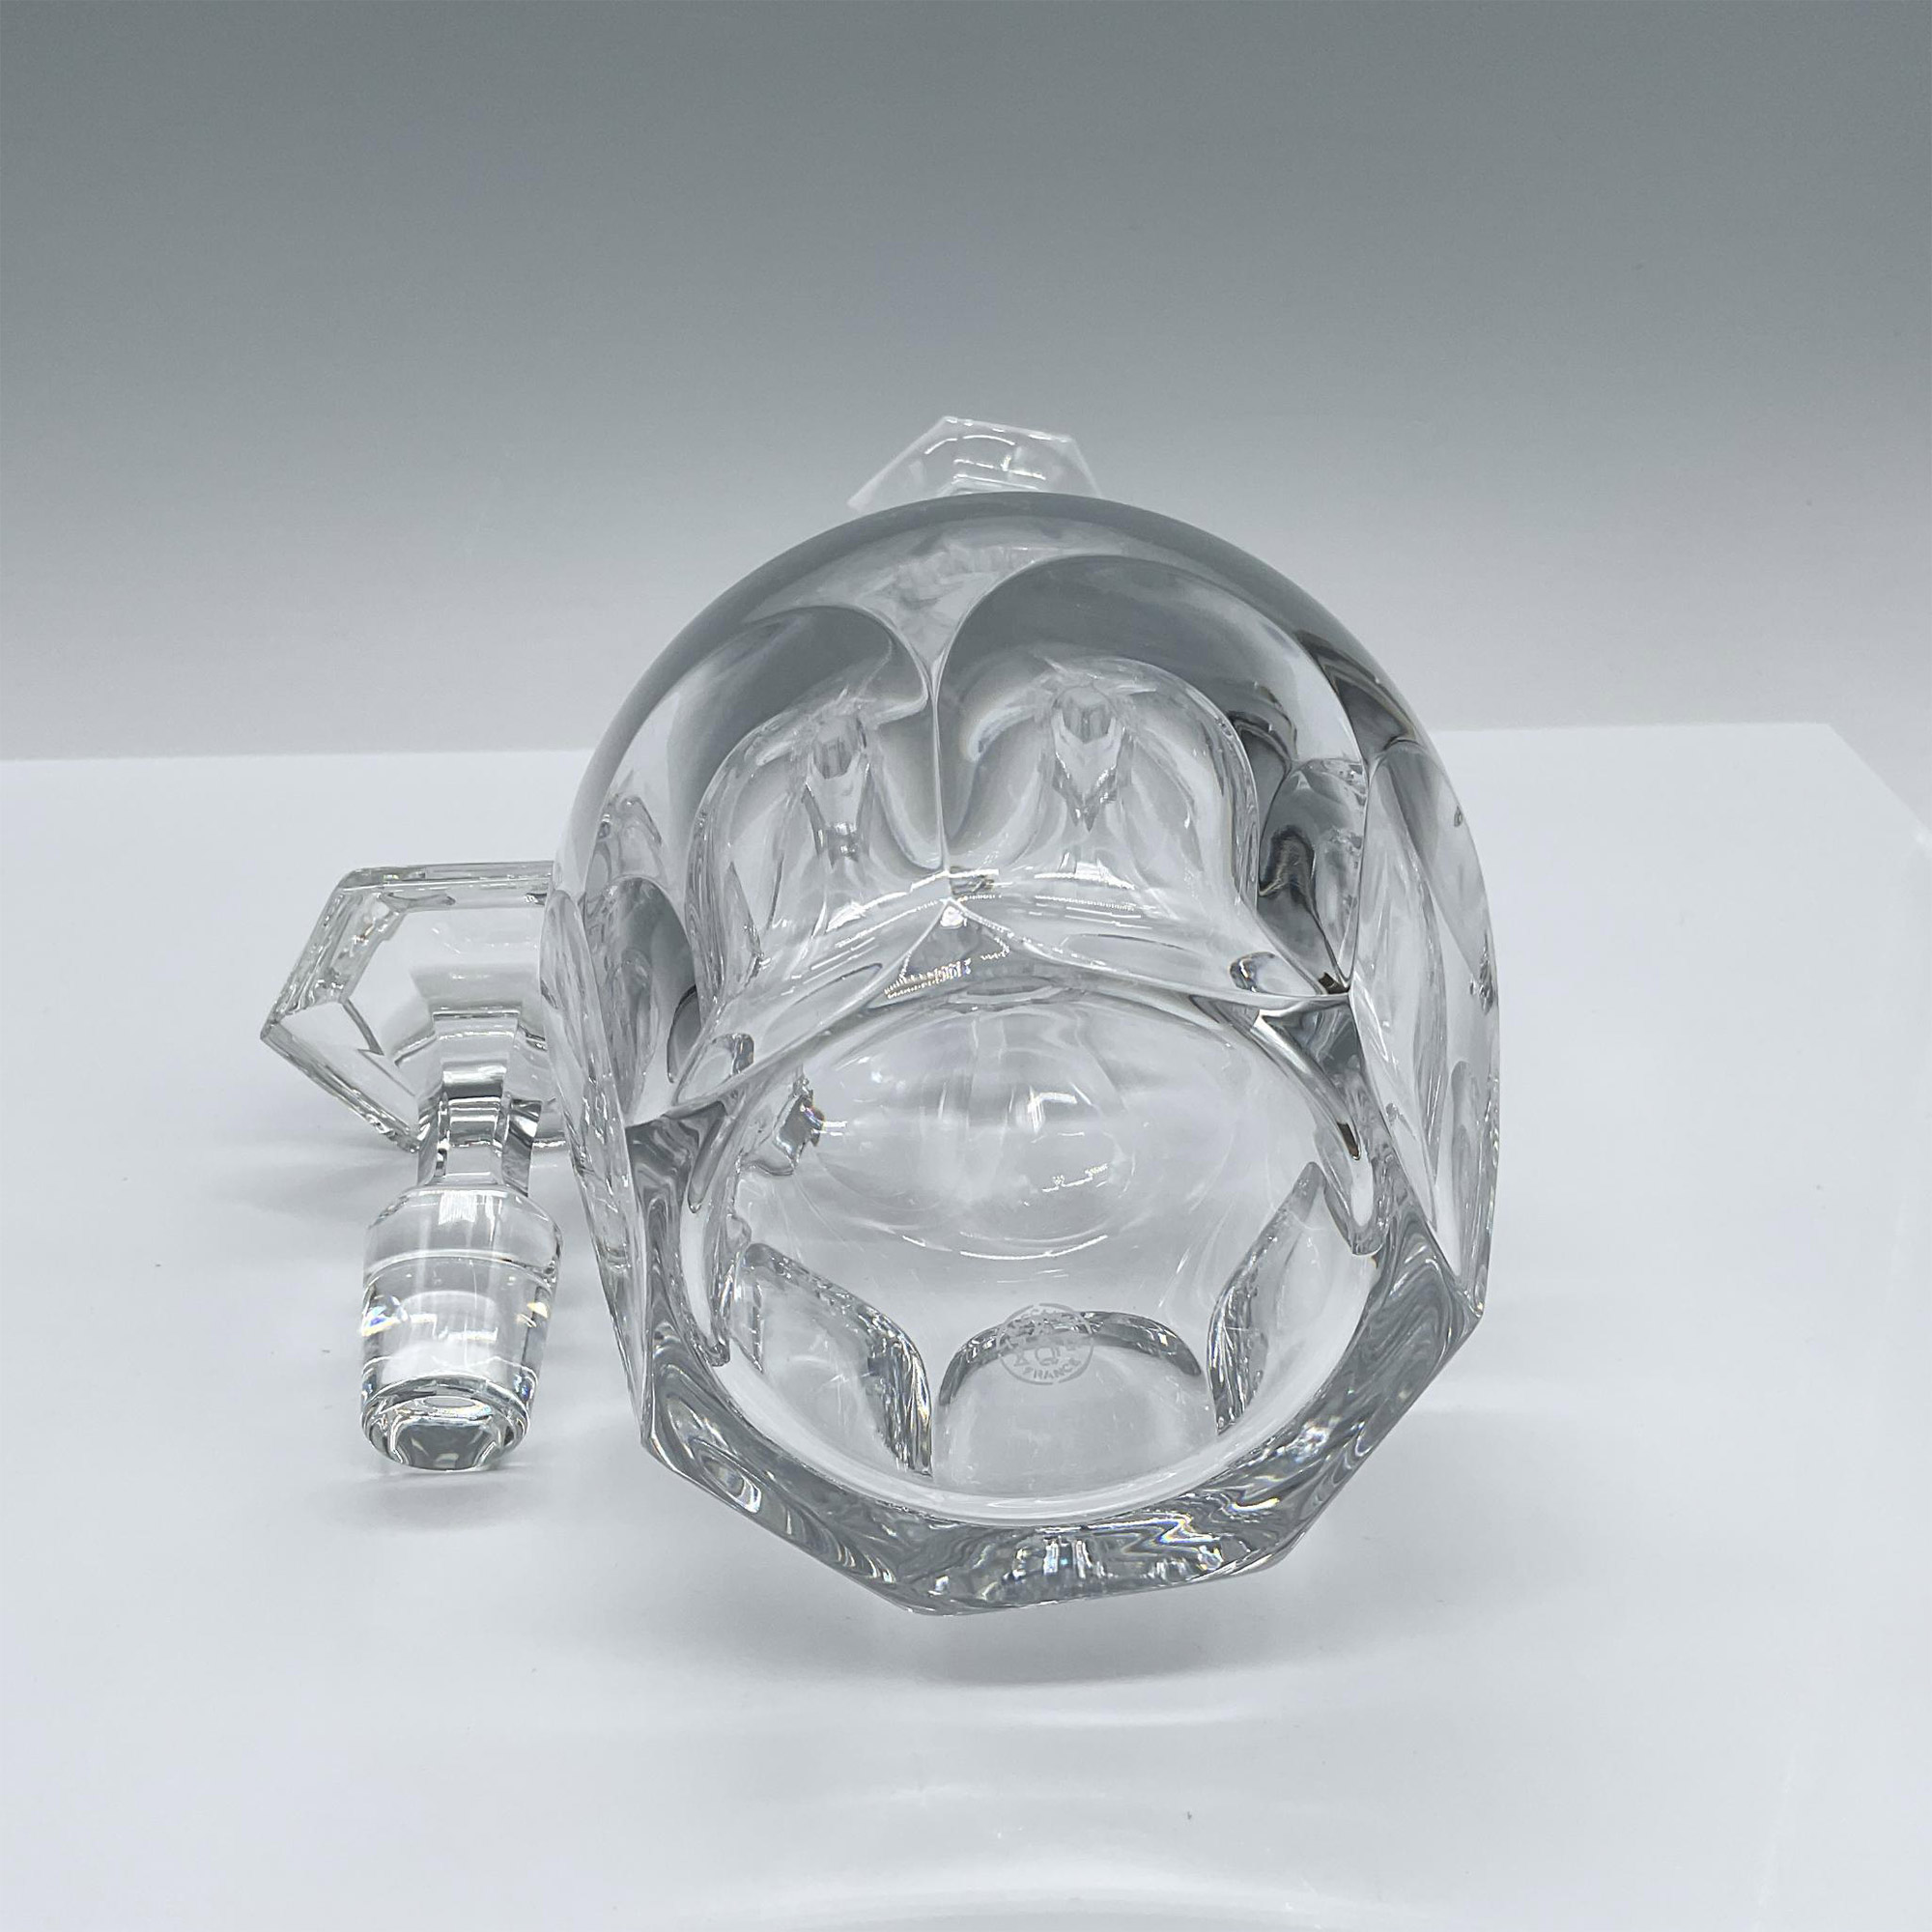 Baccarat Harcourt-Versailles Decanter and Stopper - Image 3 of 3